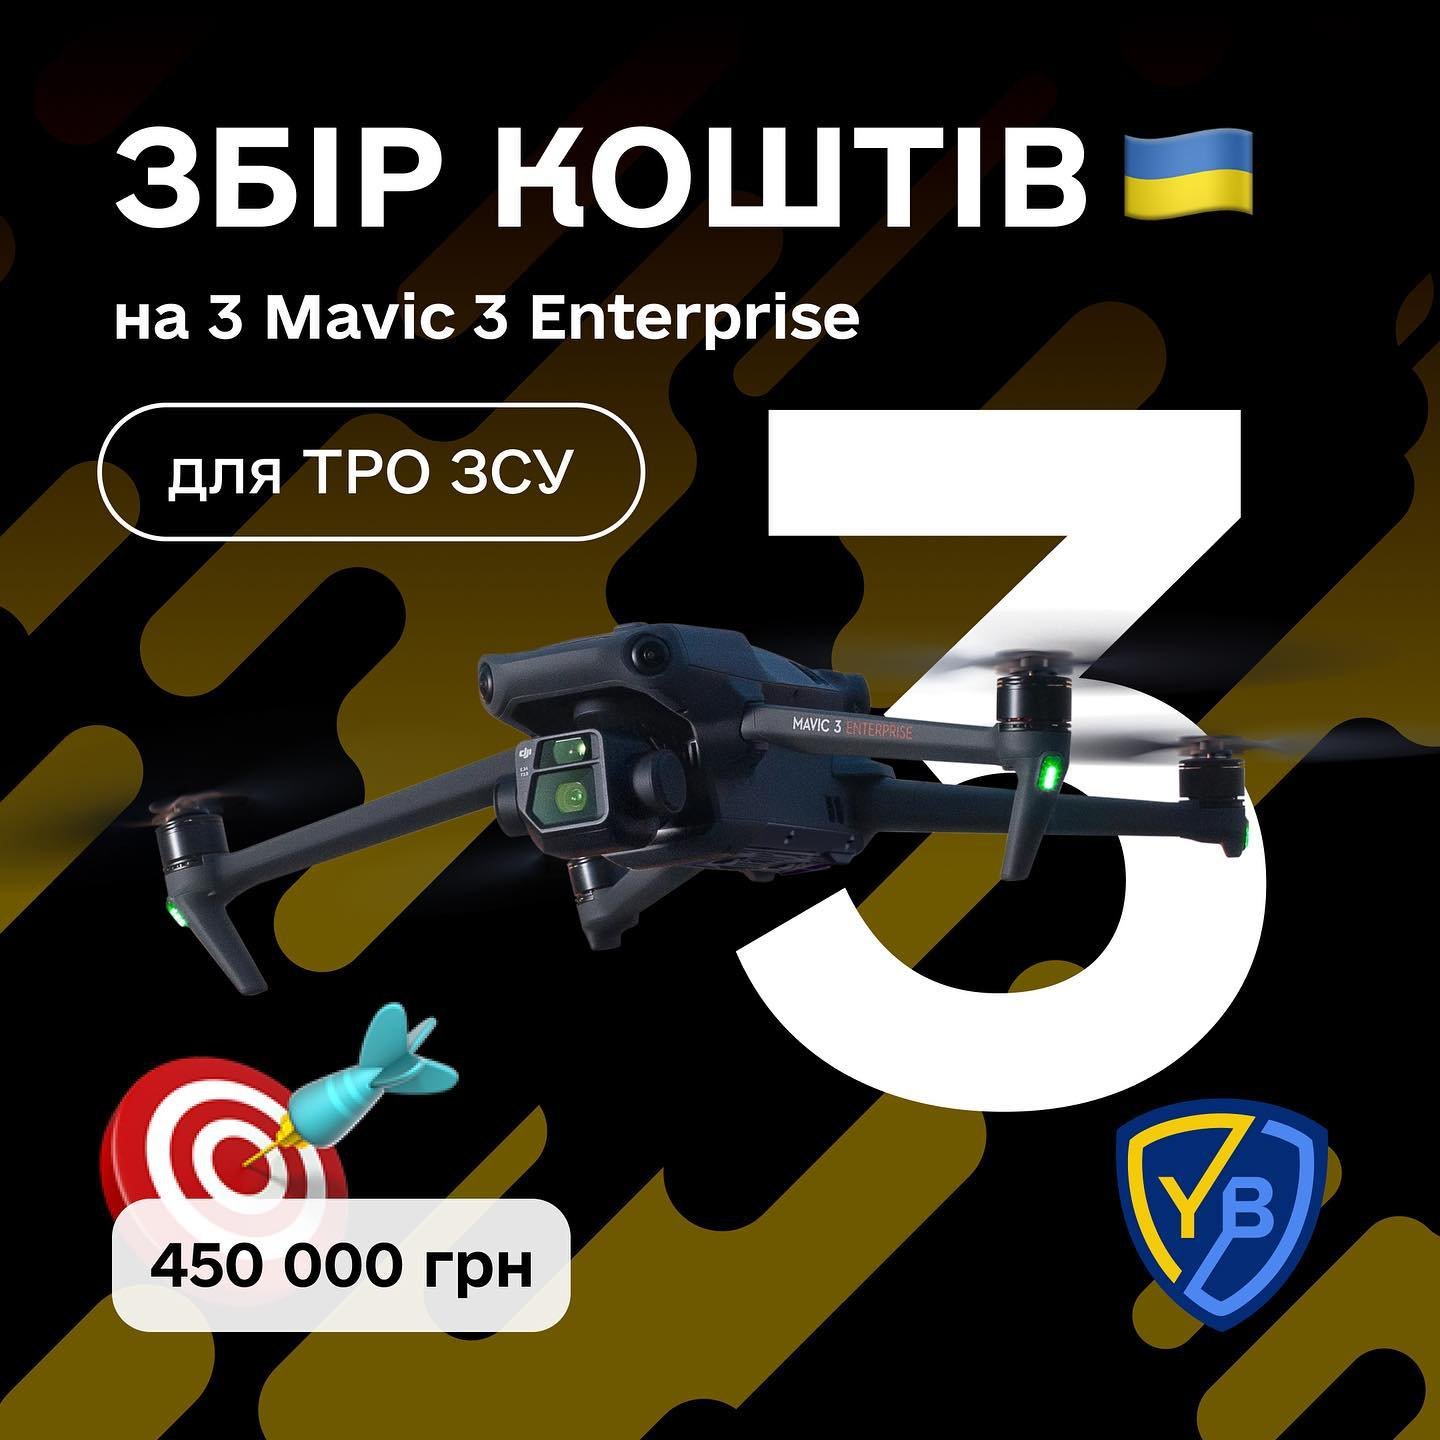 Collection of donations for the purchase of DJI Mavic 3 Enterprise for aerial reconnaissance of the Armed Forces